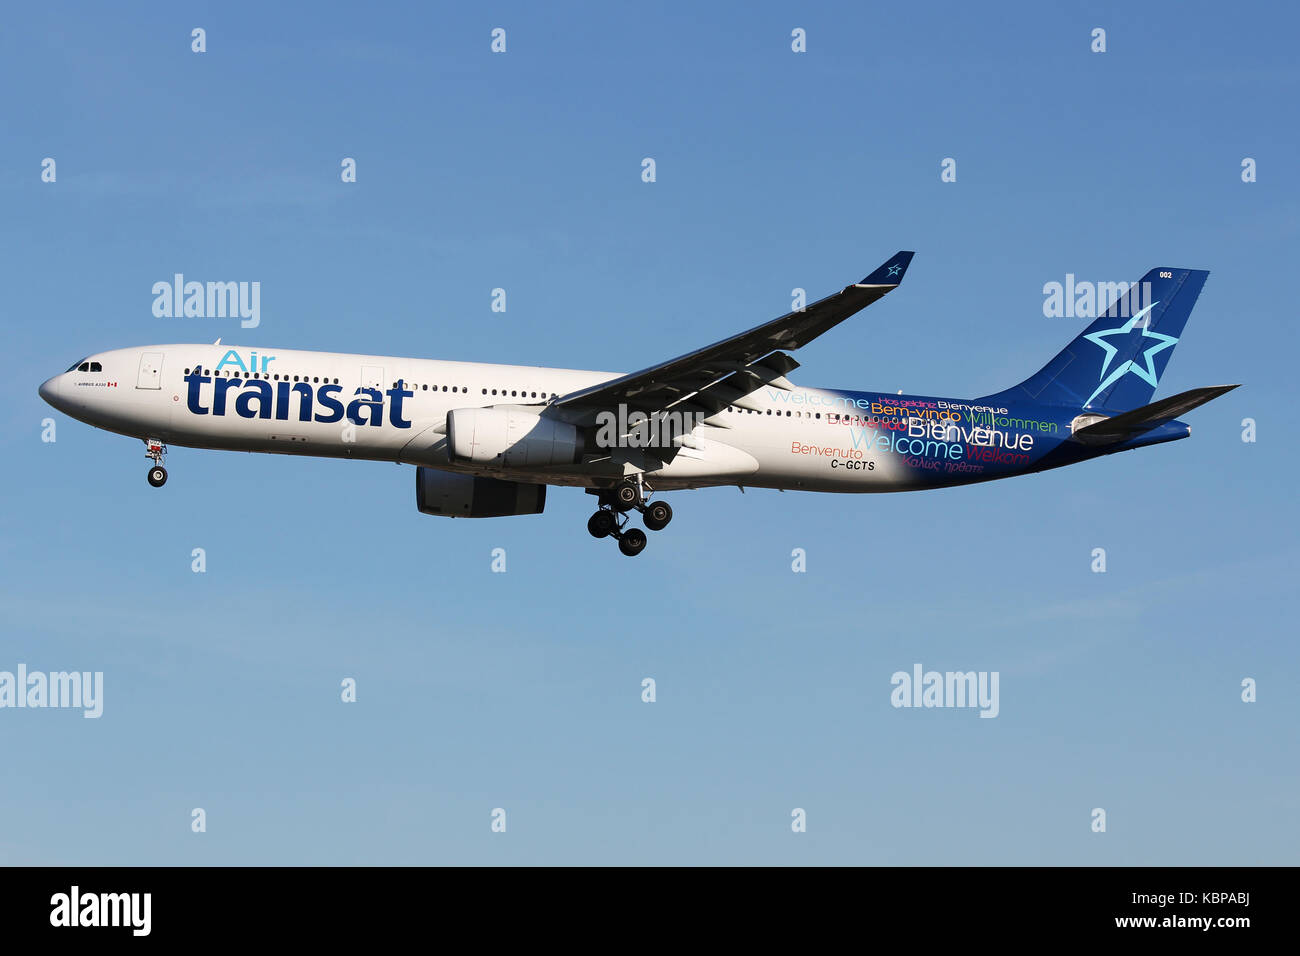 Air Transat Airbus A330 landing at London Gatwick airport after a flight from Canada Stock Photo